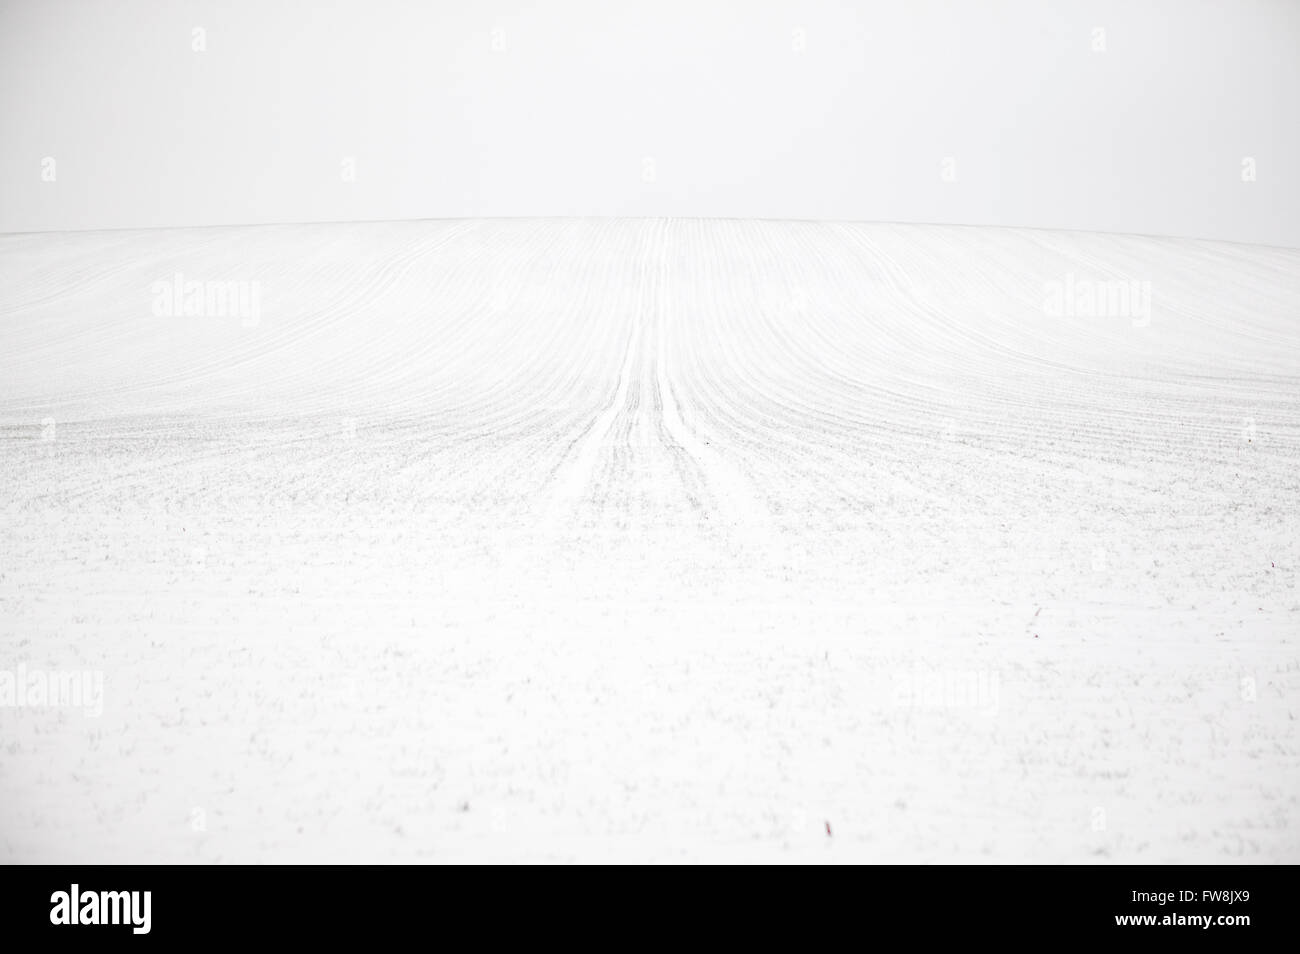 Snow covered fields and hills in the british countryside. After a dusting of snow in winter the landscape is transformed into a magical wonderland, trees disappear in the white covering and fields show undualtions with the variations in snow fall and light. Stock Photo